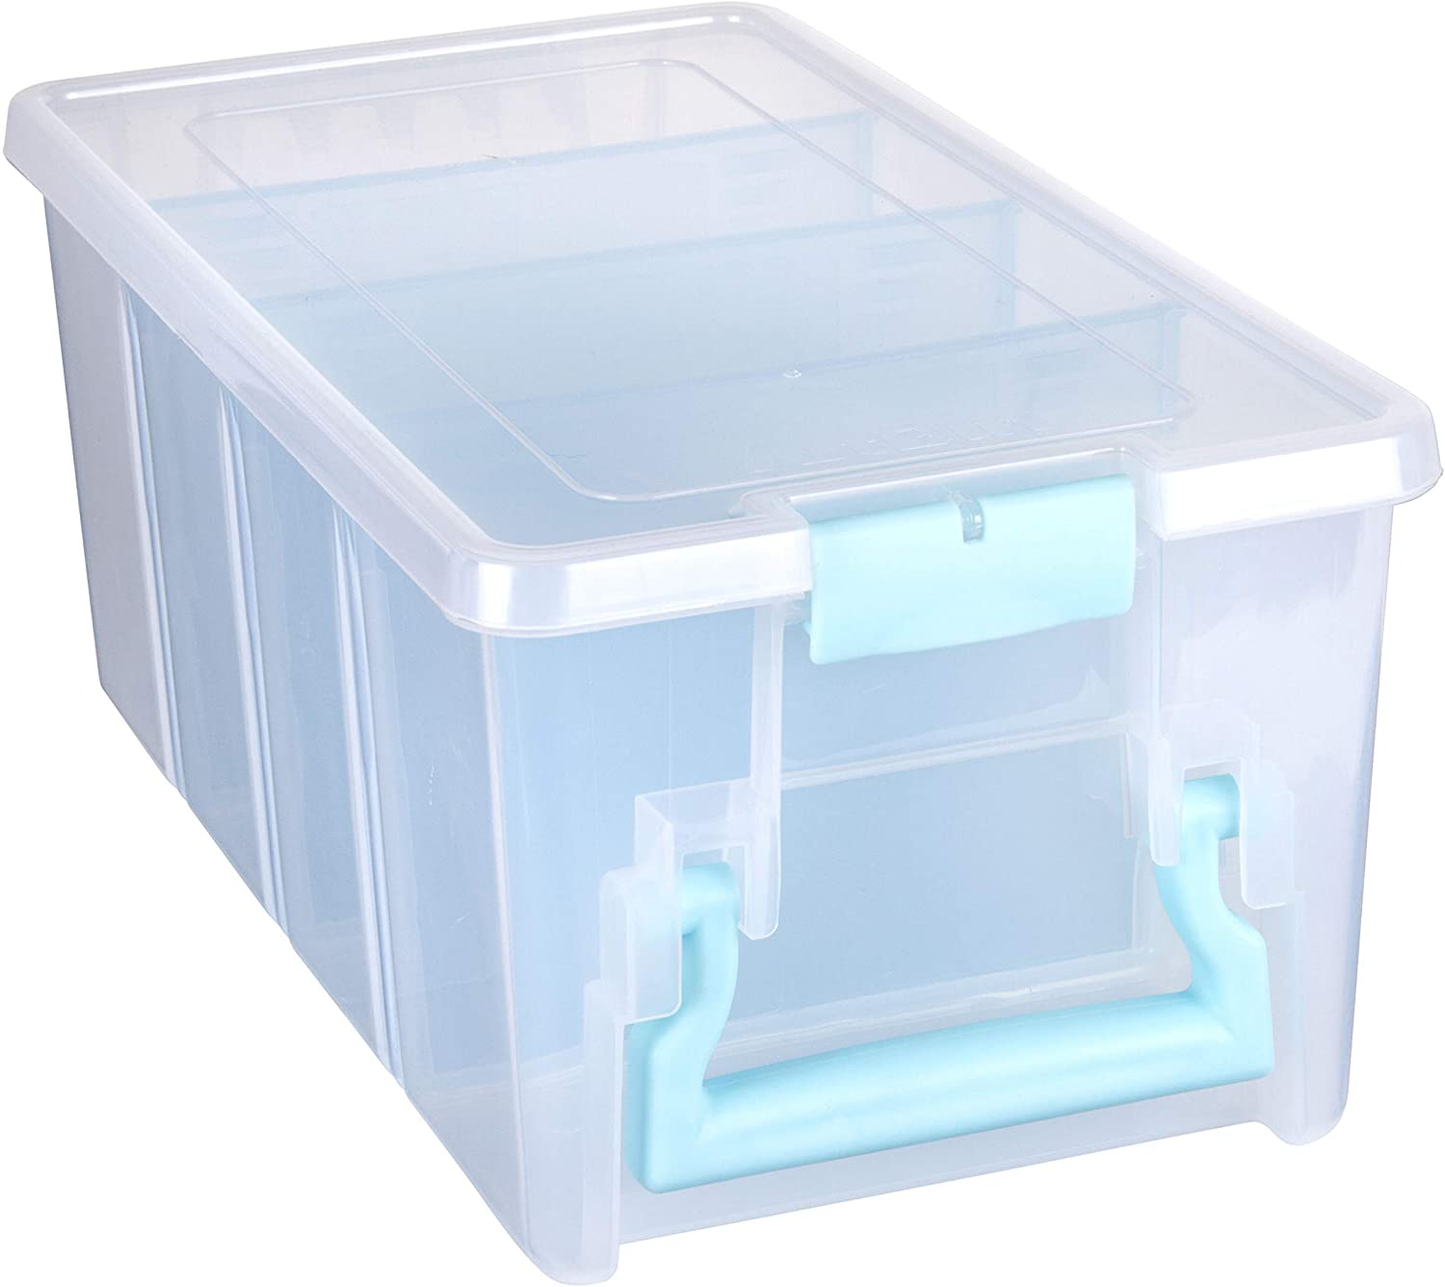 ArtBin 6925AA Semi Satchel with Removable Dividers, Portable Art & Craft Organizer with Handle, [1] Plastic Storage Case, Clear with Aqua Accents